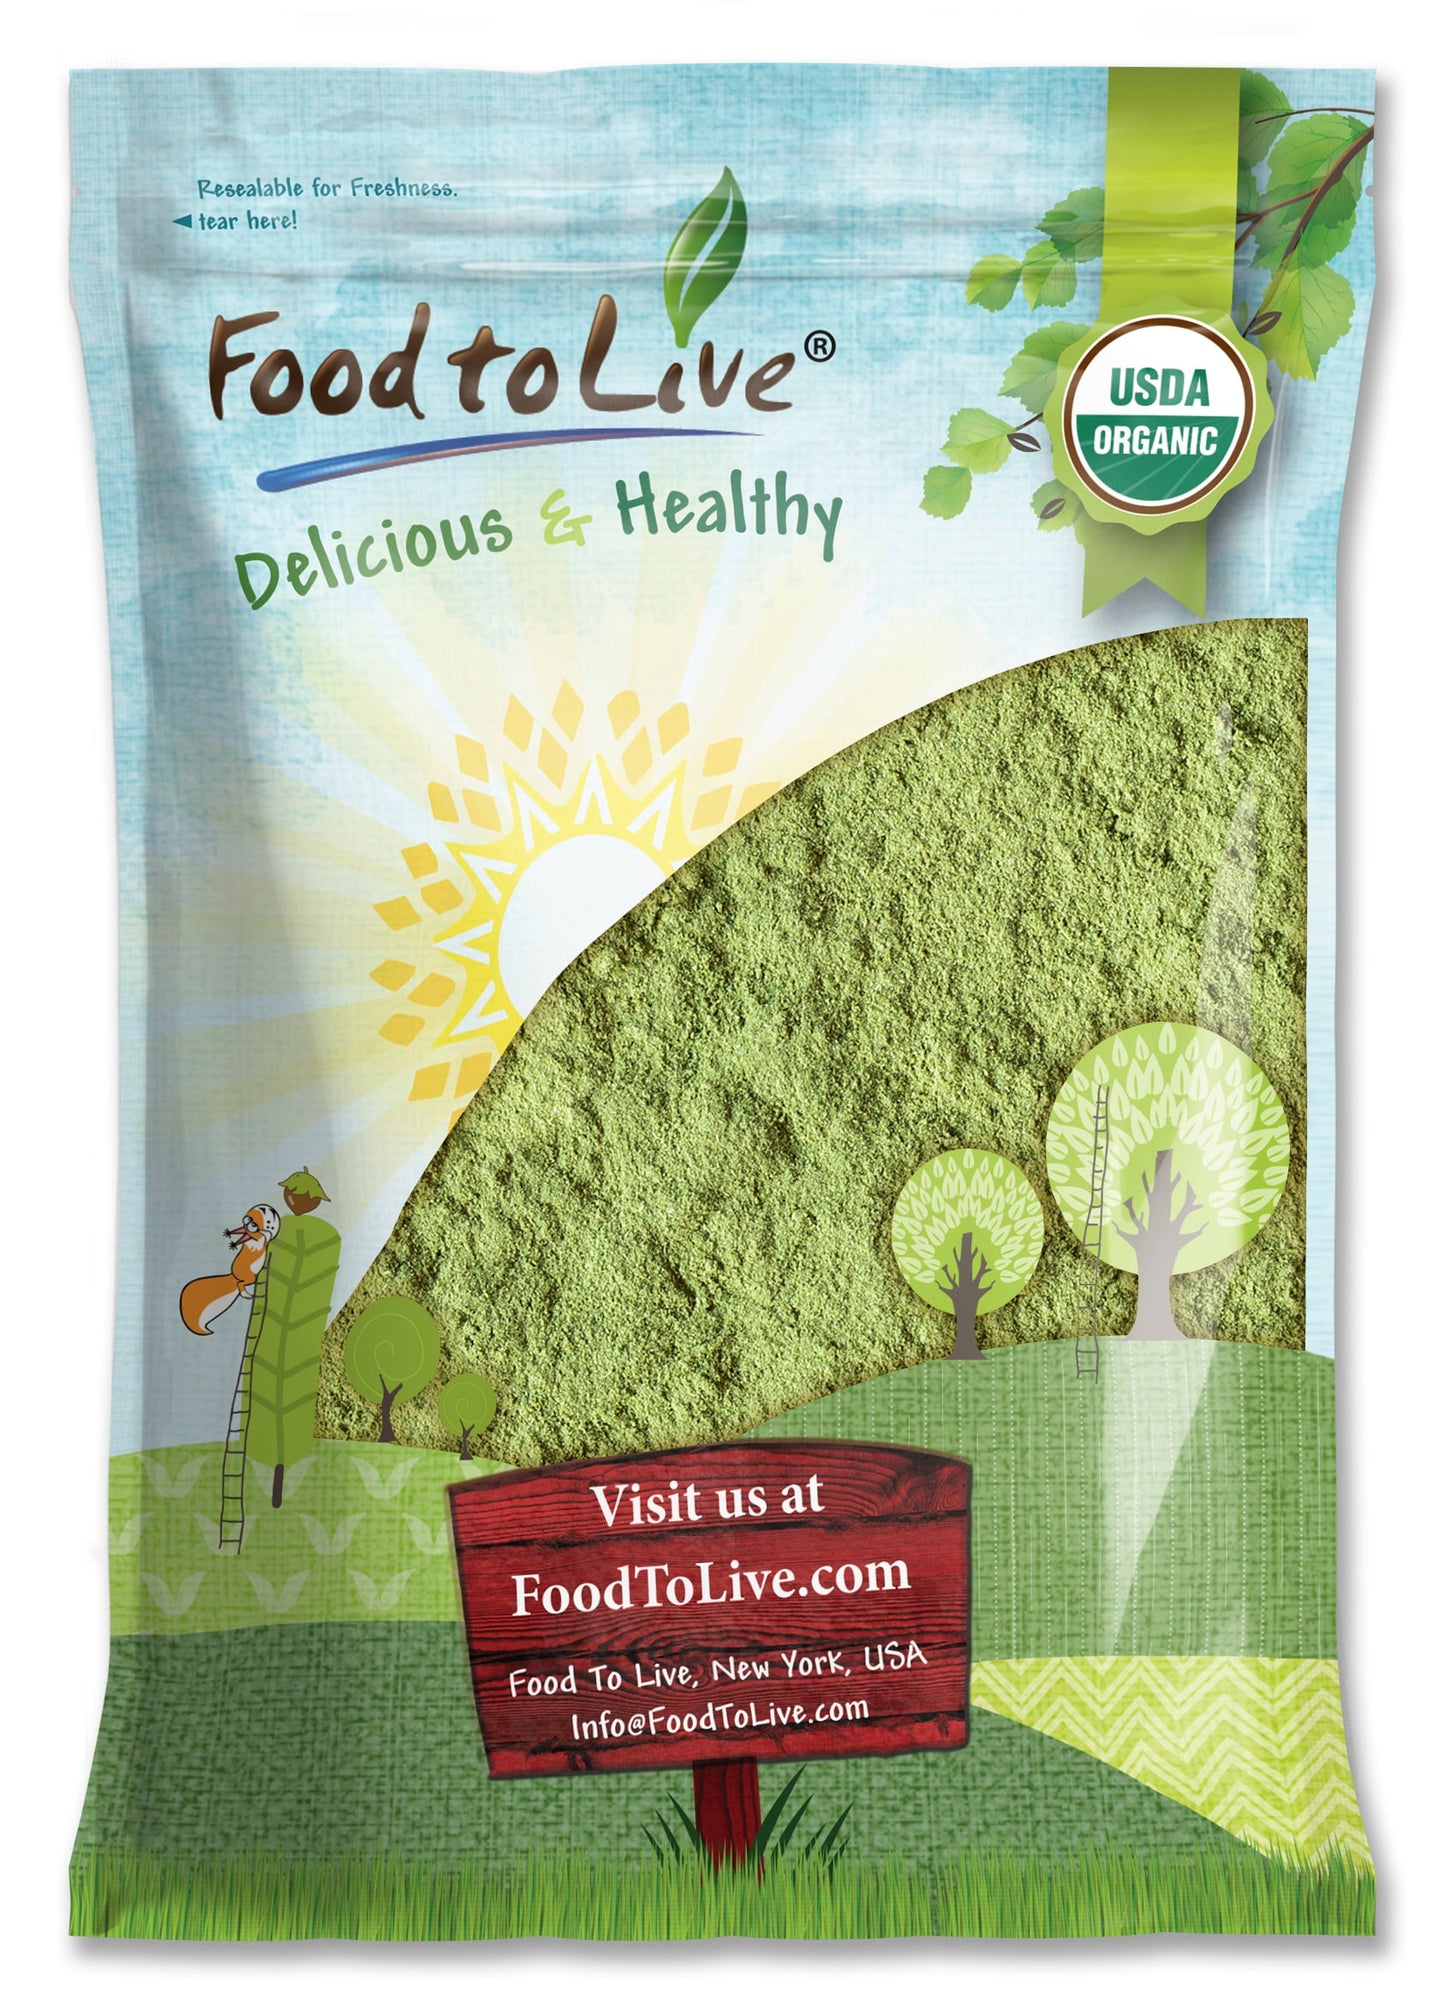 Organic Barley Grass Powder - Non-GMO, Ground Whole Raw Dried Young Leaves, Fine Milled, Vegan, Bulk, Great for Juices, Smoothies, Shakes, and Drinks. Good Source of Fiber and Protein